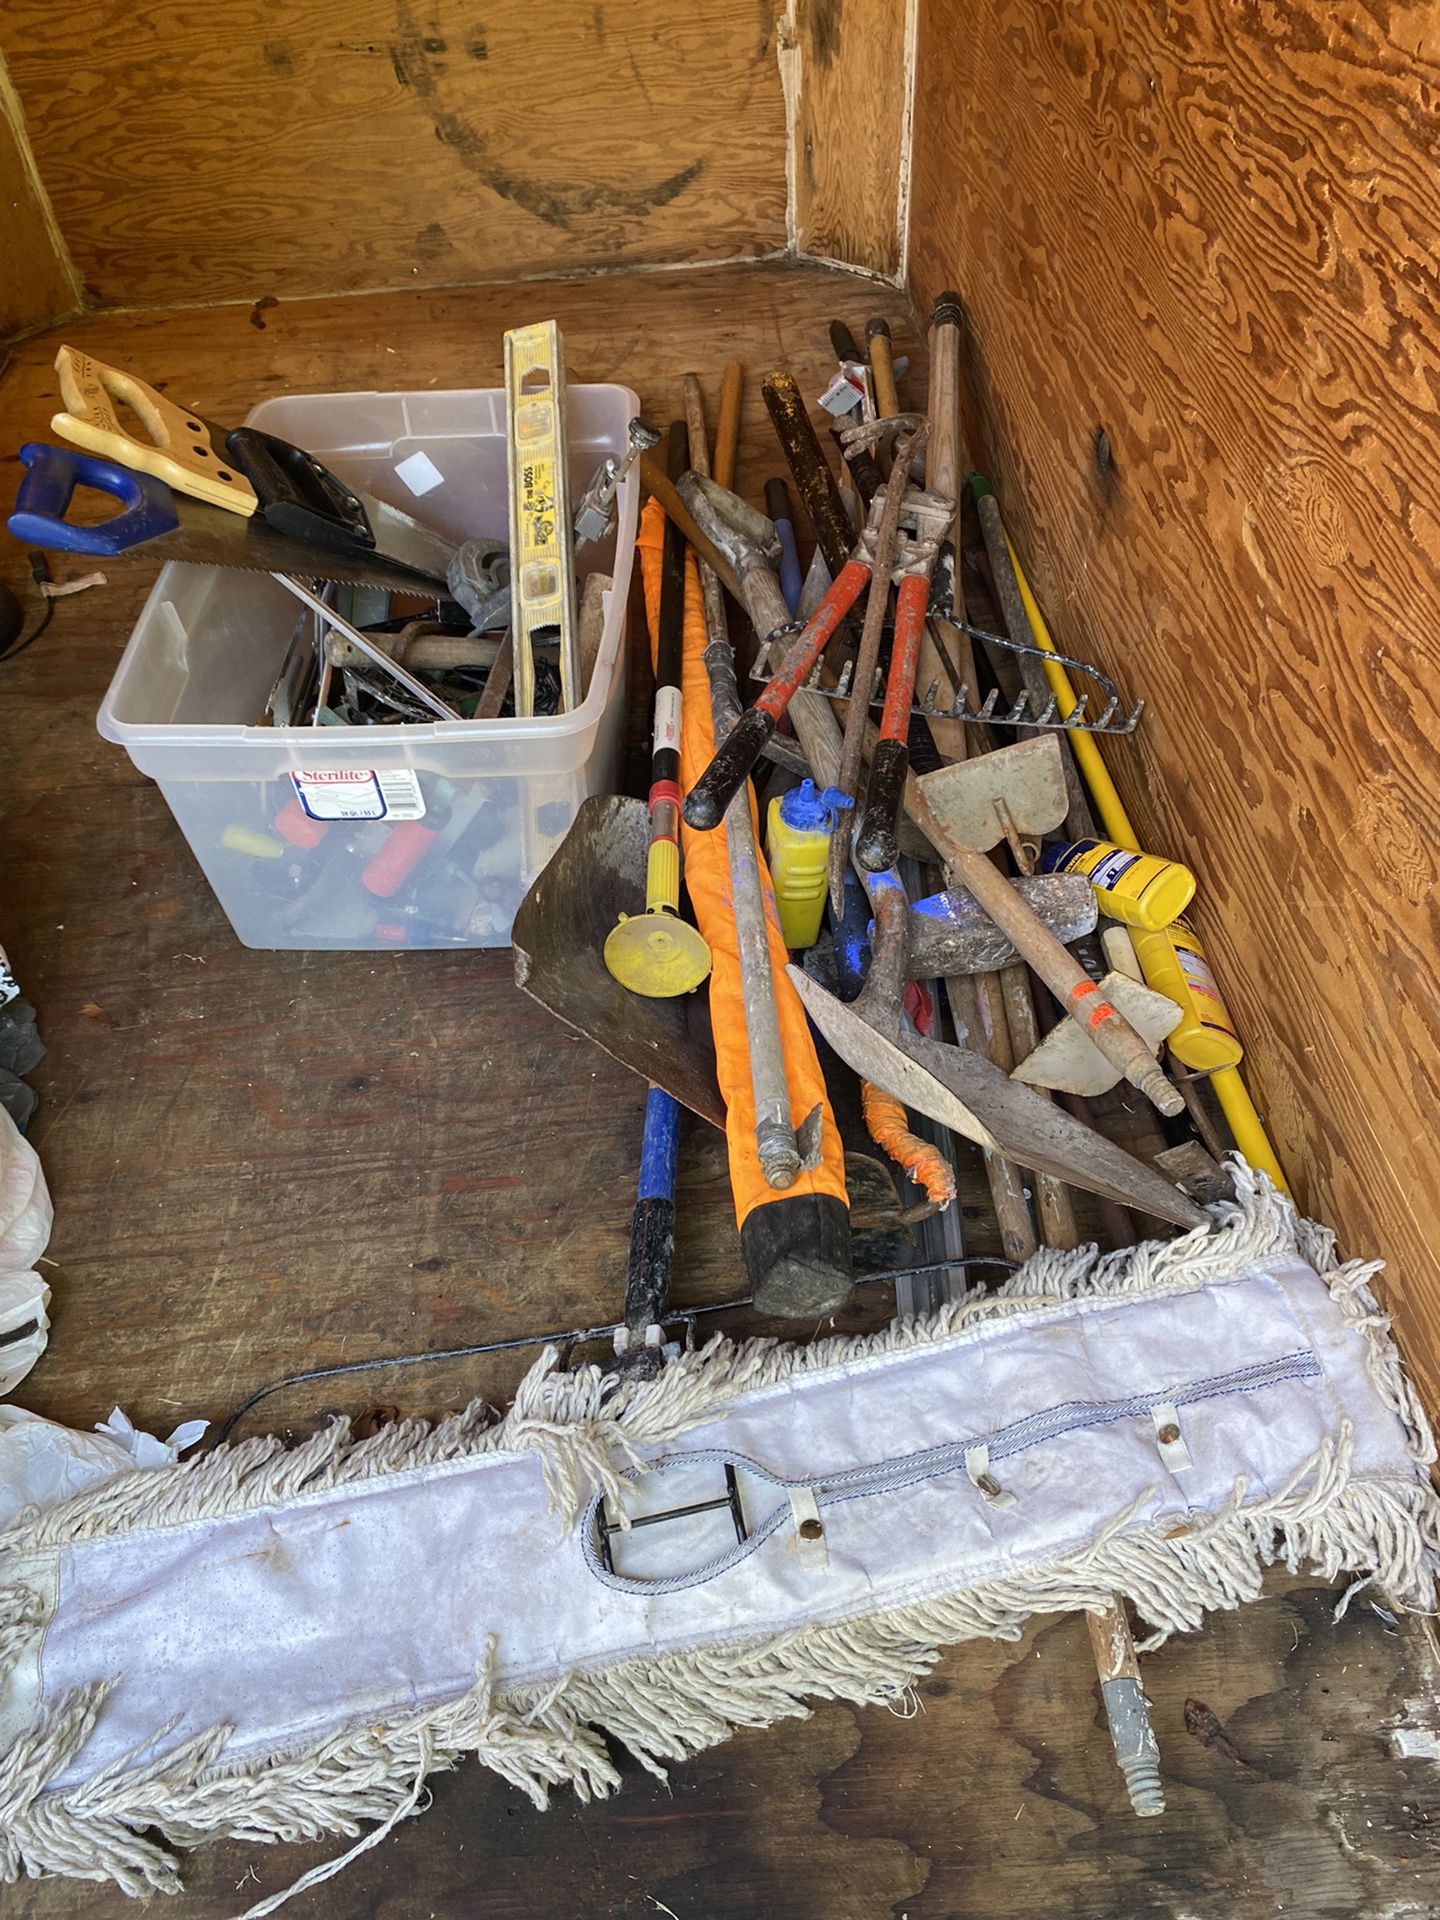 Trailer Of Tools